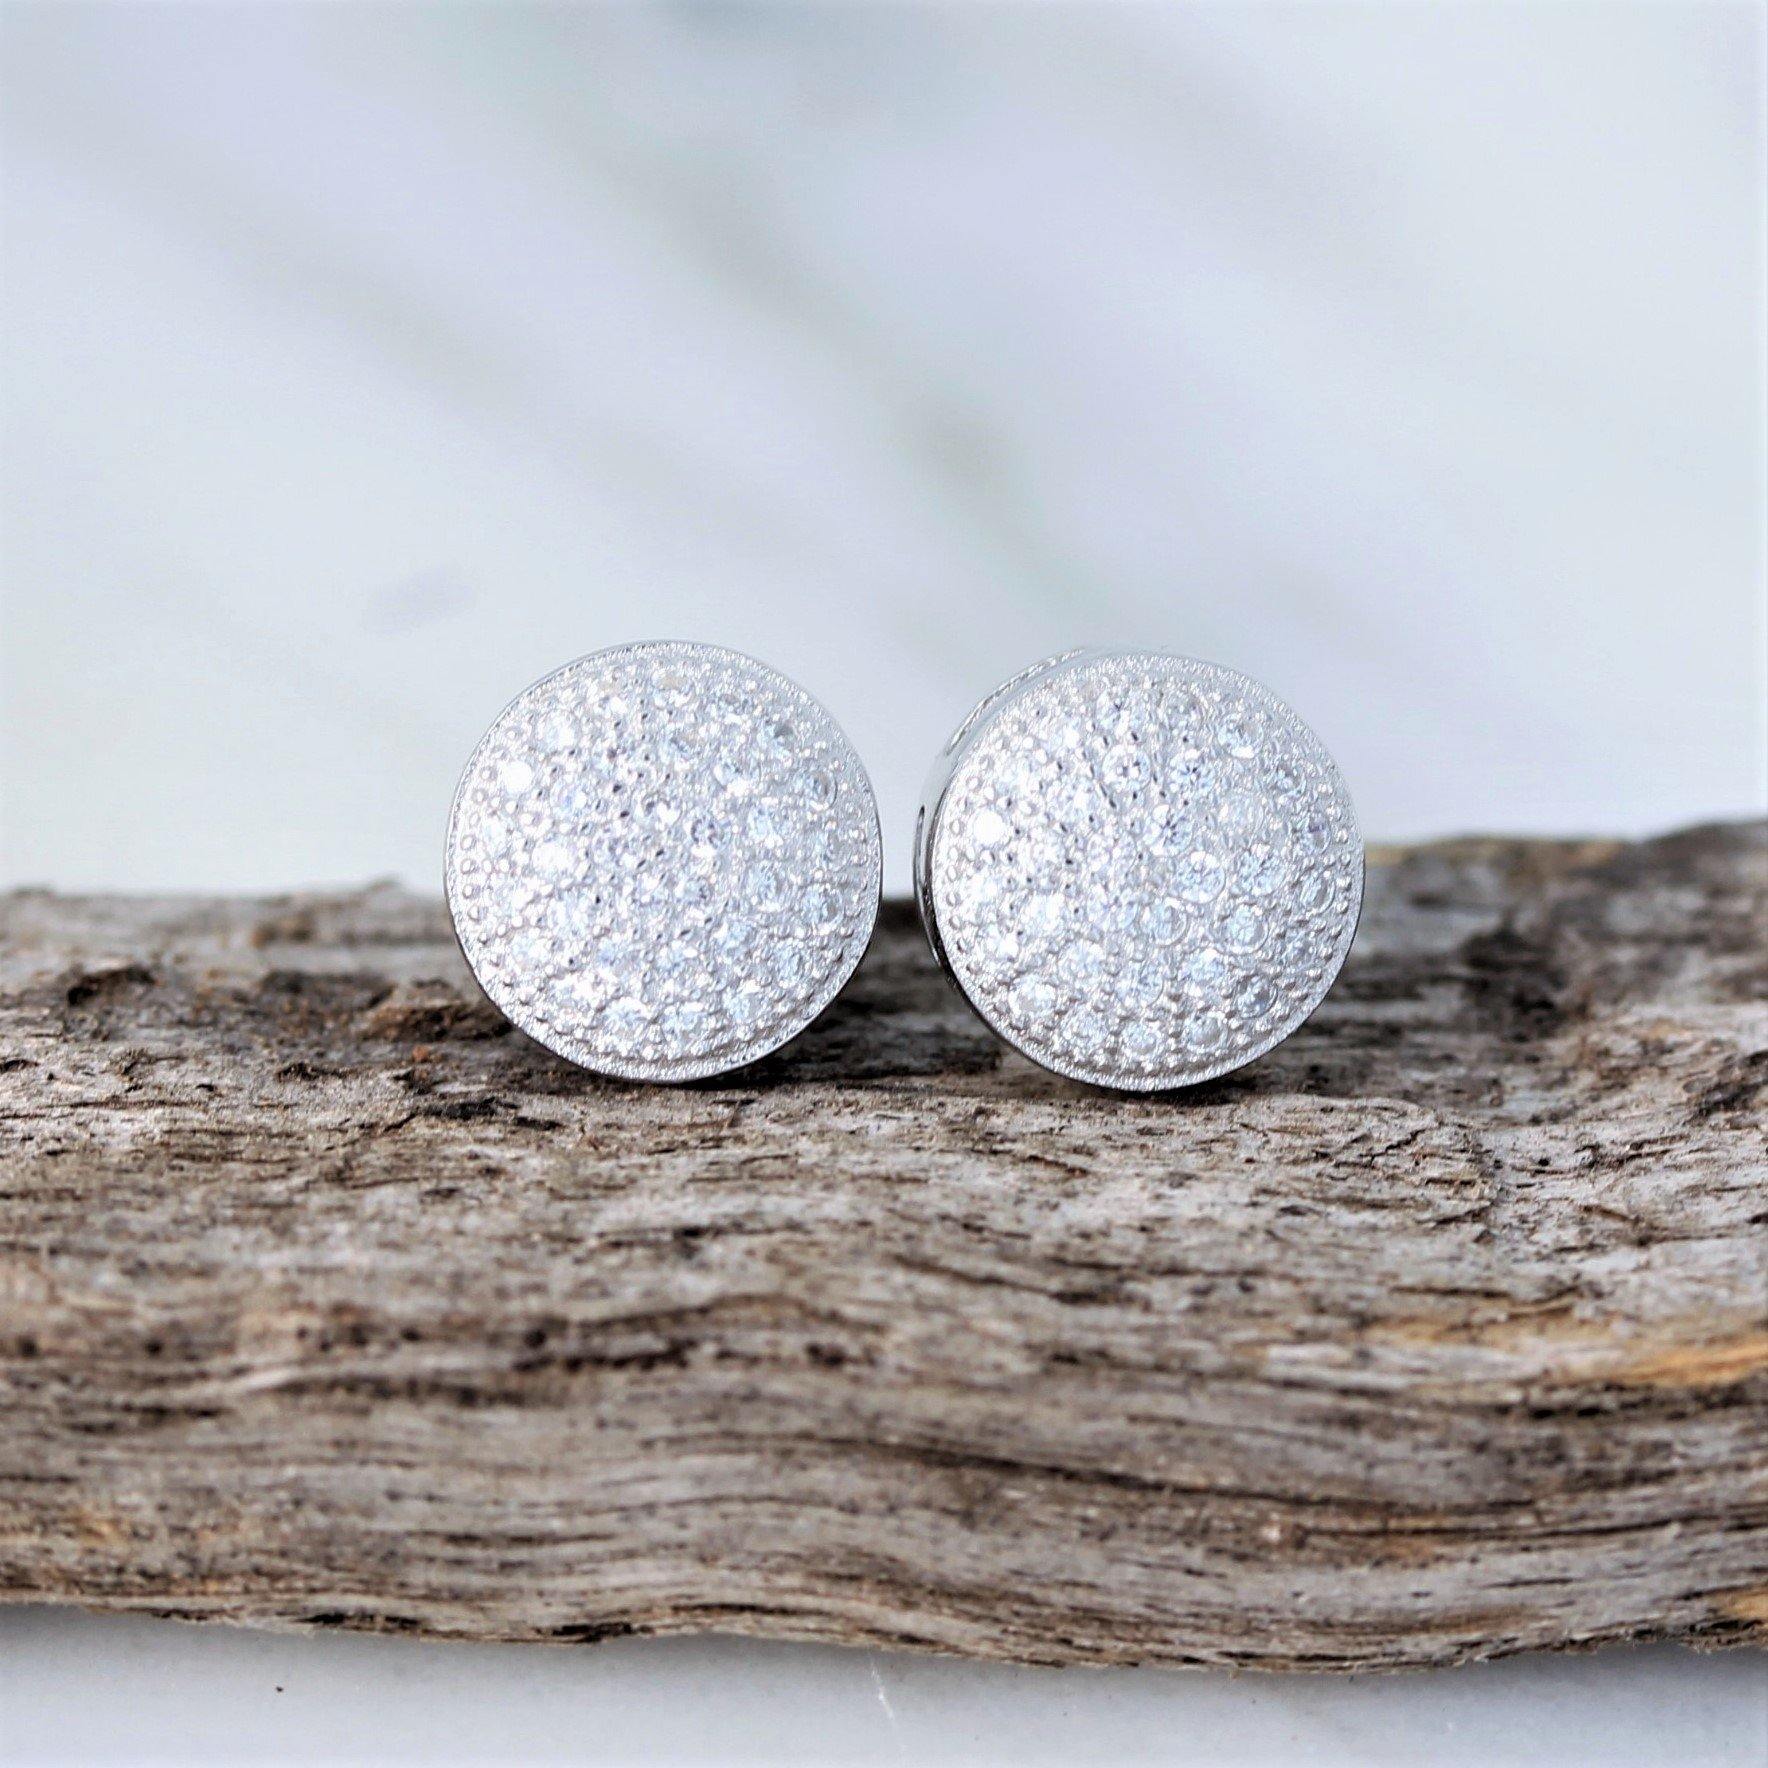 Sterling Silver Bridal Wedding 9mm Round Flat Disc CZ Pave Set Stud Earrings - STERLING SILVER DESIGNS